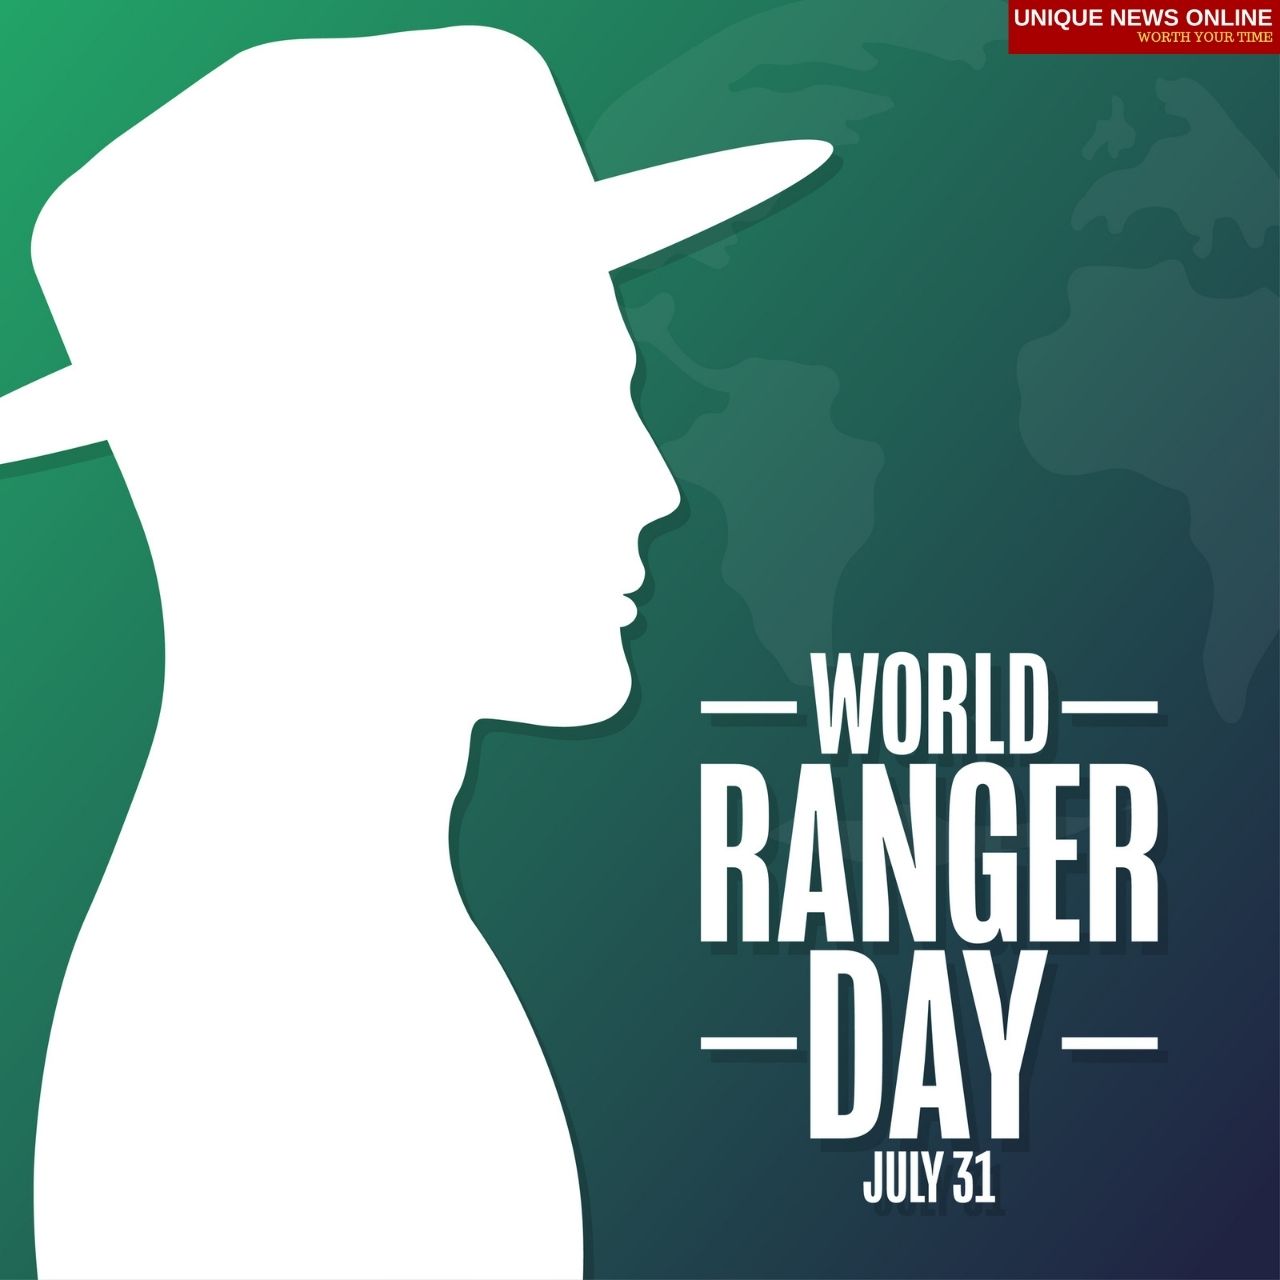 World Ranger Day 2021 Quotes, Messages, HD Images, and Status to commemorate Rangers killed or injured in the line of duty